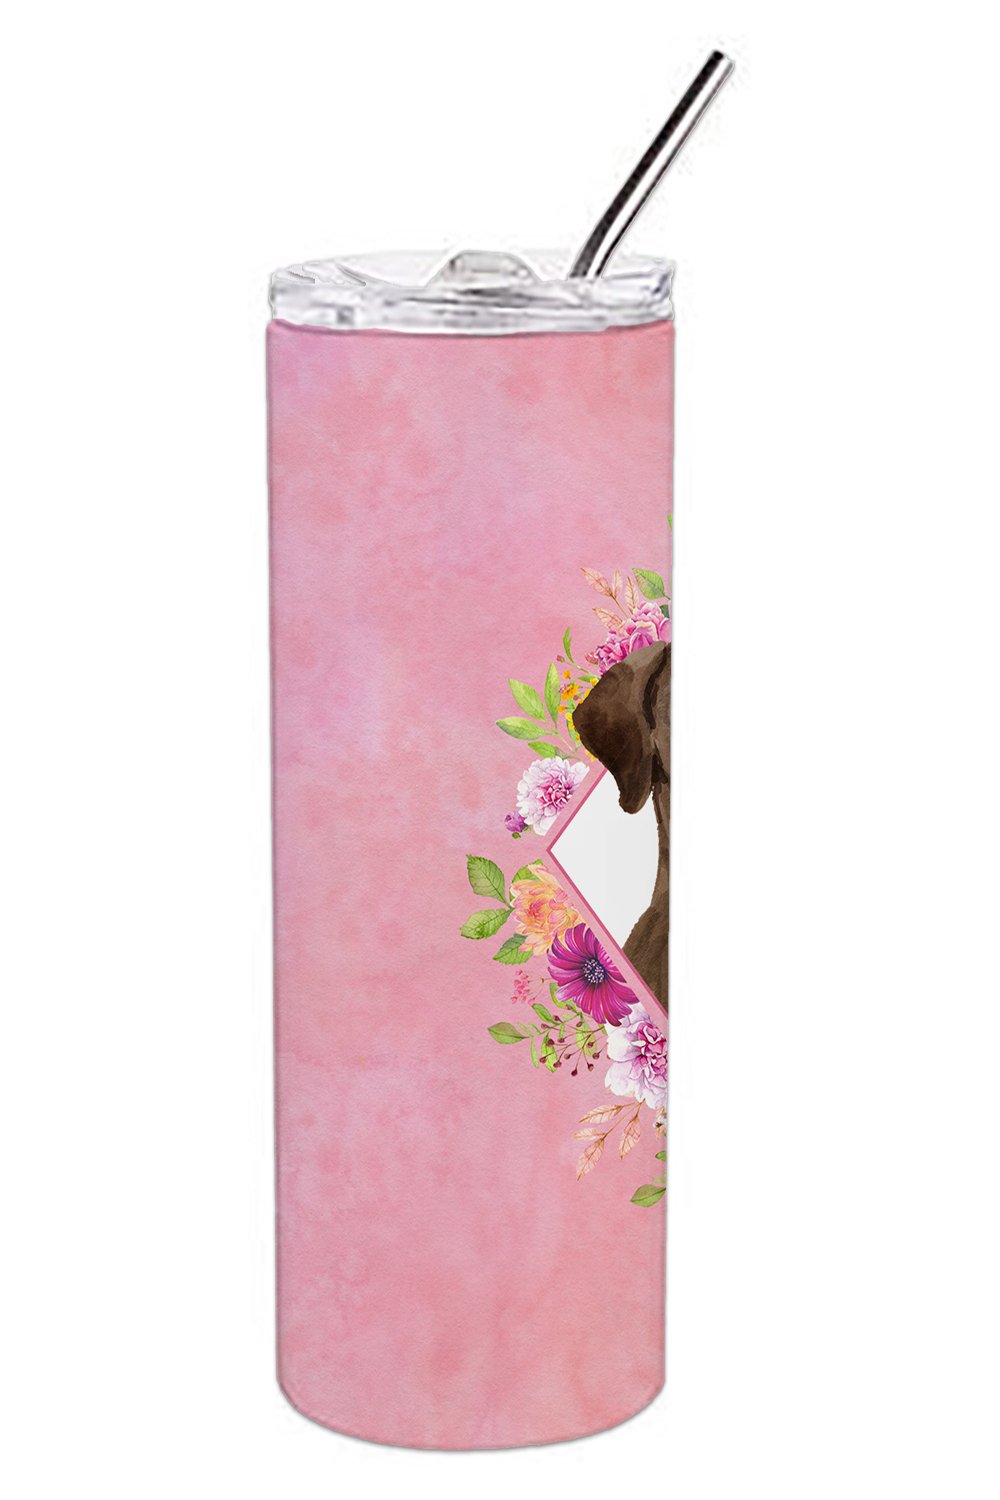 Chocolate Labrador Pink Flowers Double Walled Stainless Steel 20 oz Skinny Tumbler CK4251TBL20 by Caroline's Treasures